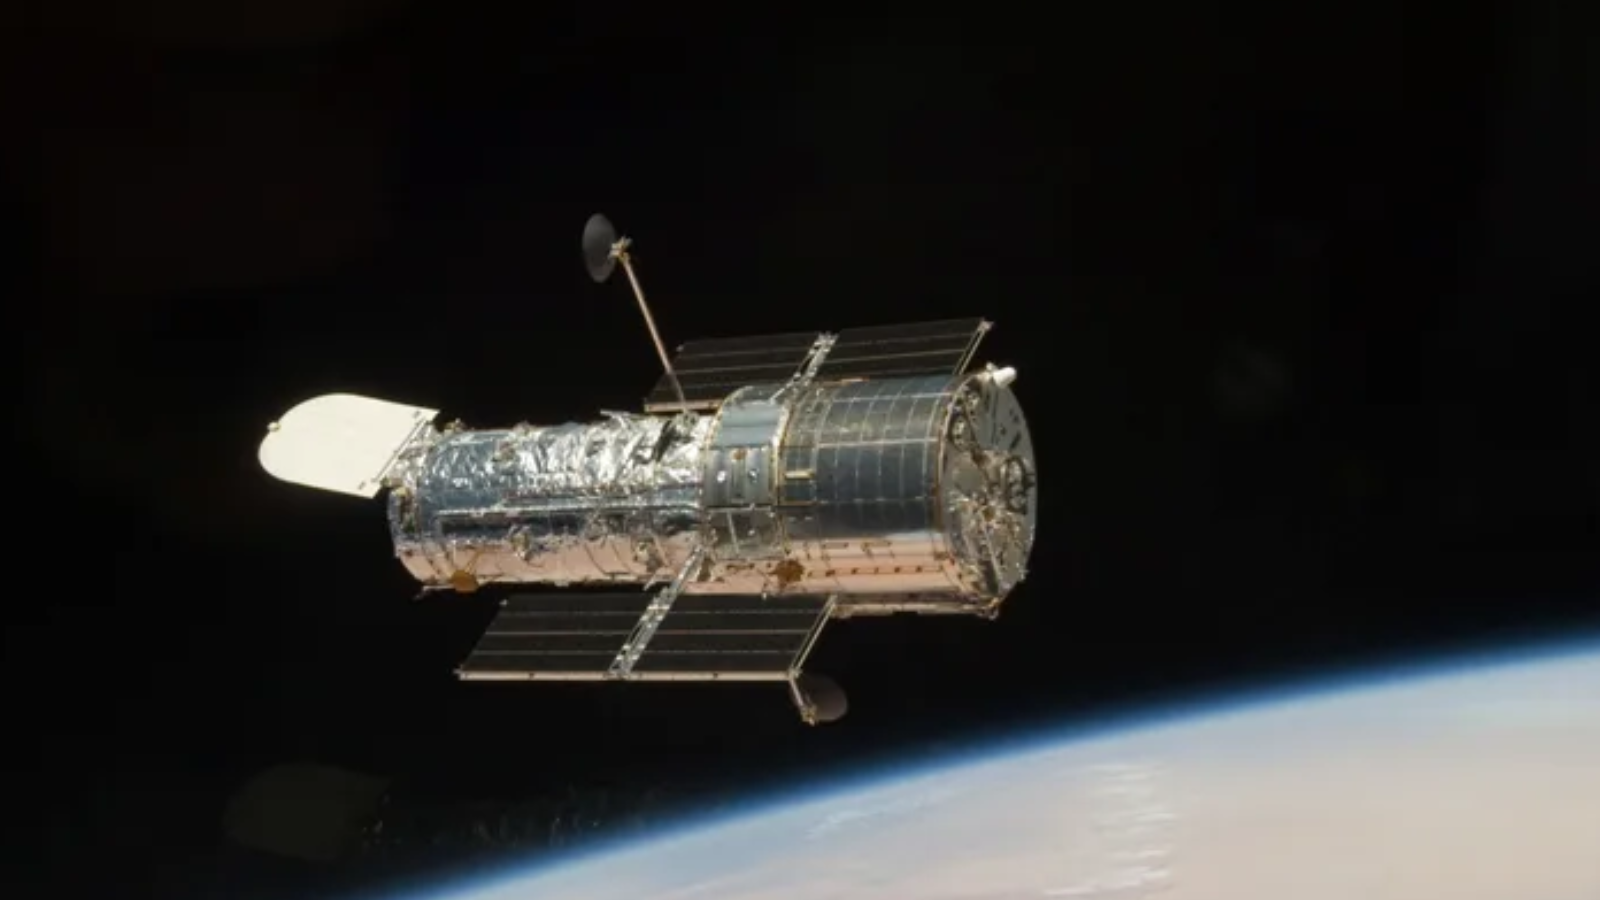 The Hubble Space Telescope is old. Here’s NASA’s new plan to keep it alive through 2035 Space